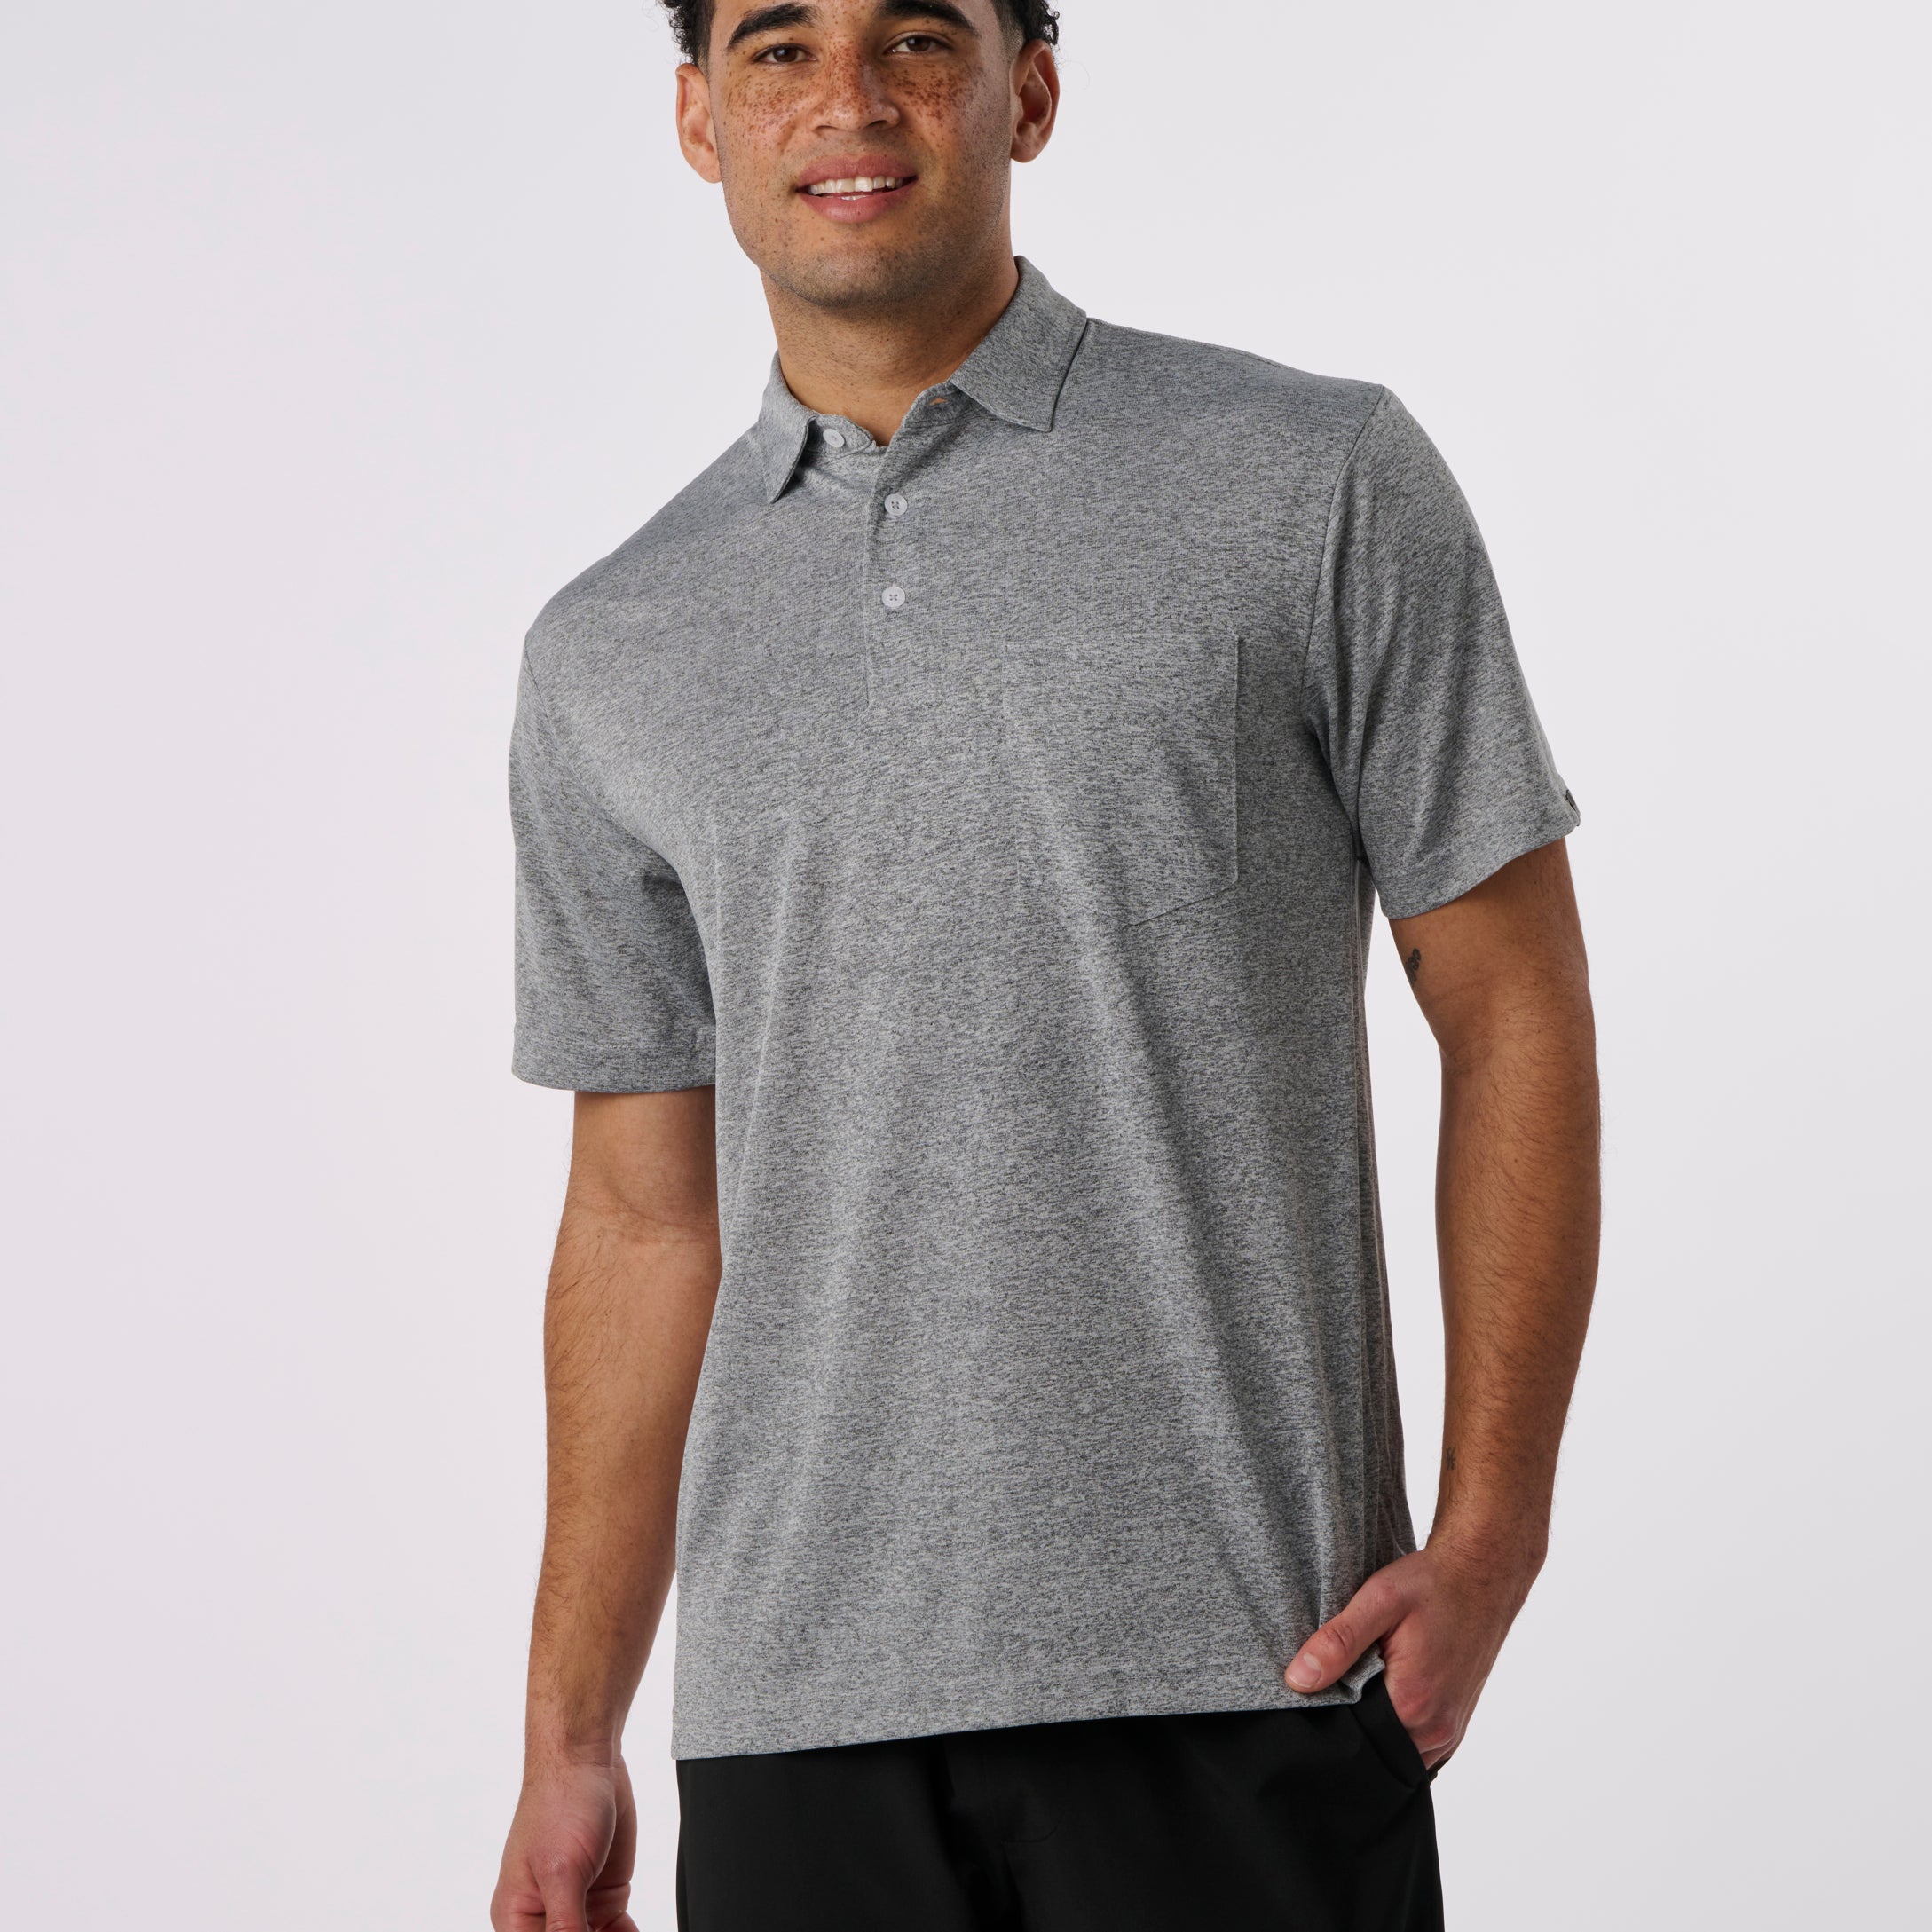 RECOVER_RD5000_SPORTPOLO_GREYHEATHER_FRONT.jpg